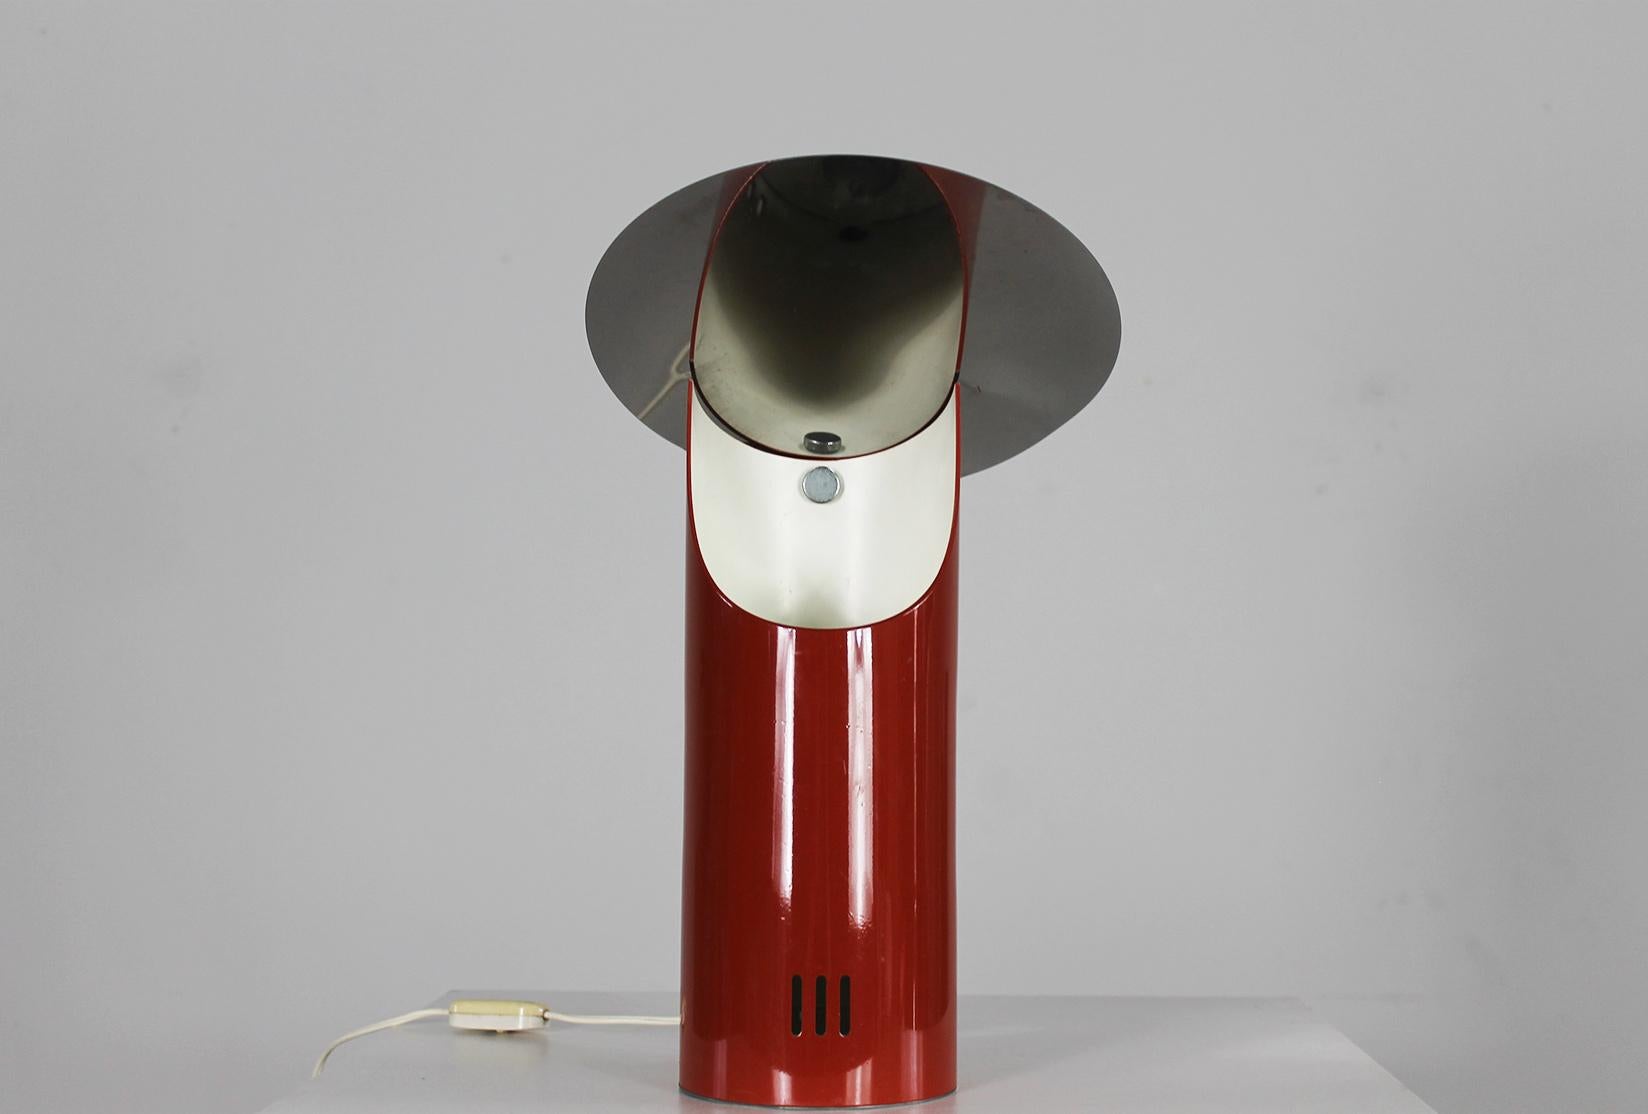 Table Lamp in red lacquered stainless steel produced by Studio Set in 1970s Italy.